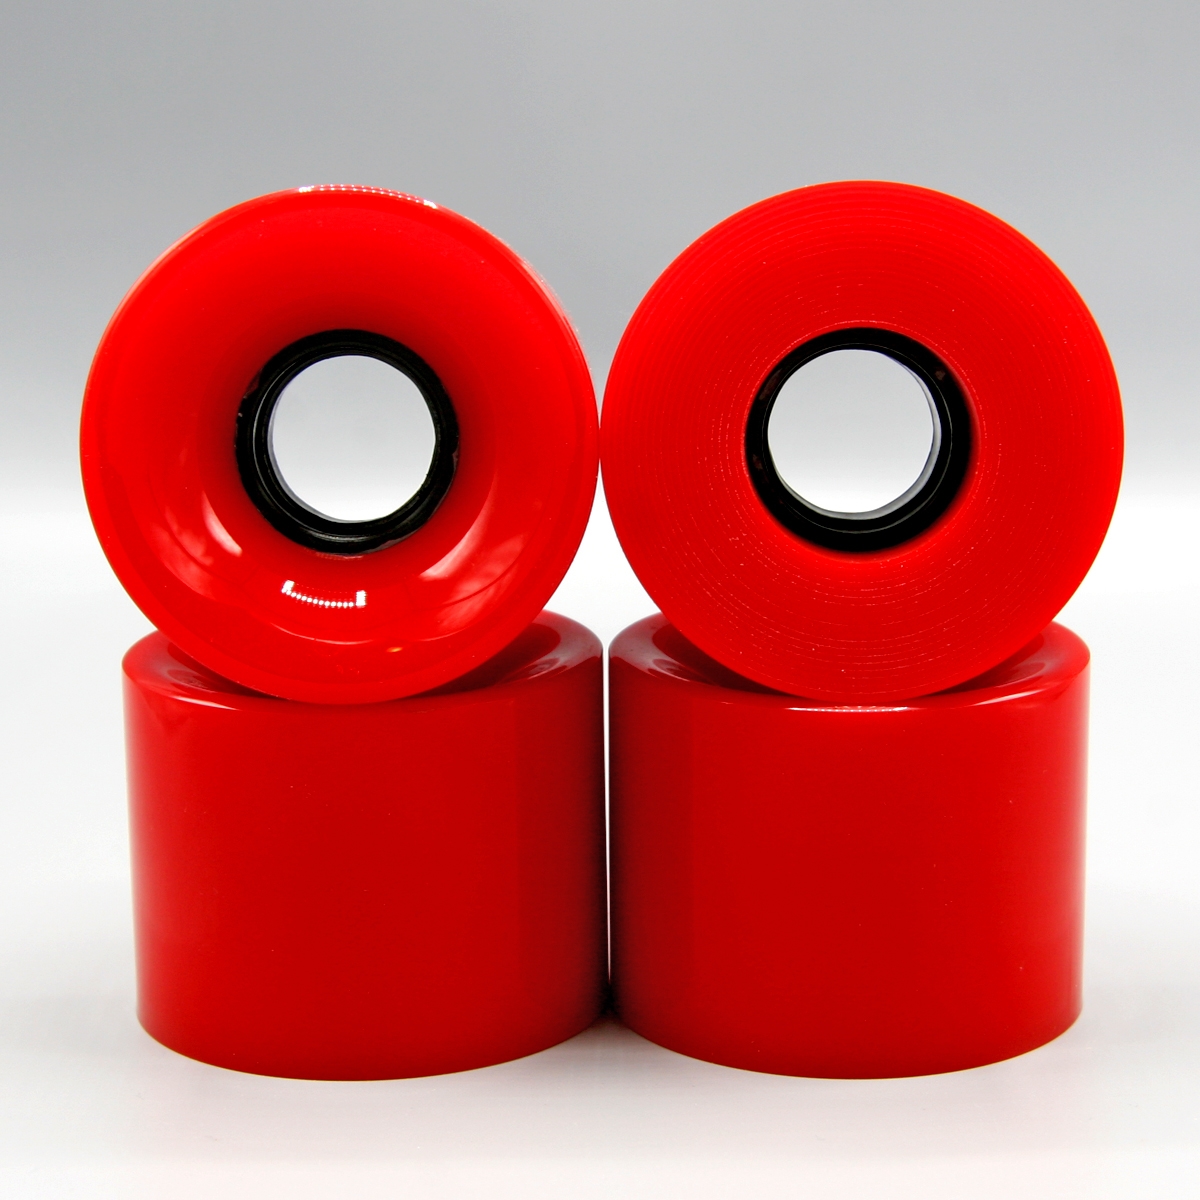 Blank 60mm (Solid Red) - Includes 1/4" Risers